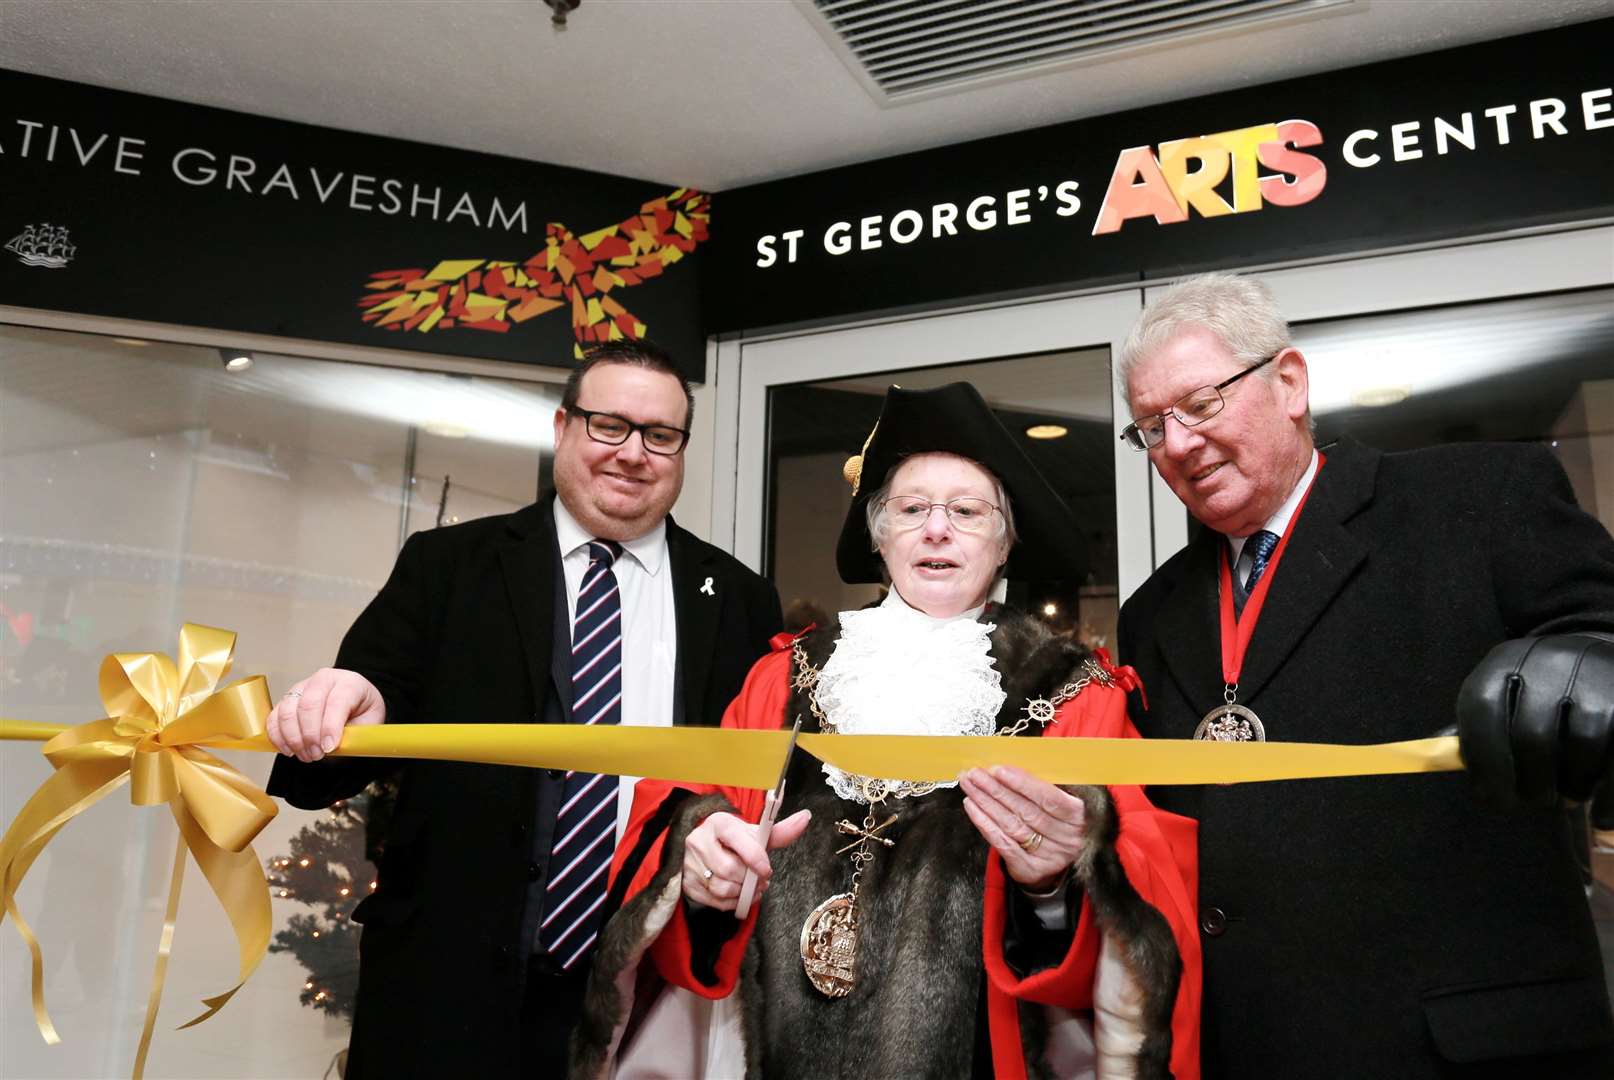 The Mayor of Gravesham, Cllr Lyn Milner, cuts the ribbon to open the St George’s Arts Centre helped by Cllr Shane Mochrie-Cox, Cabinet Member for Community & Leisure (left) and James Loughlin